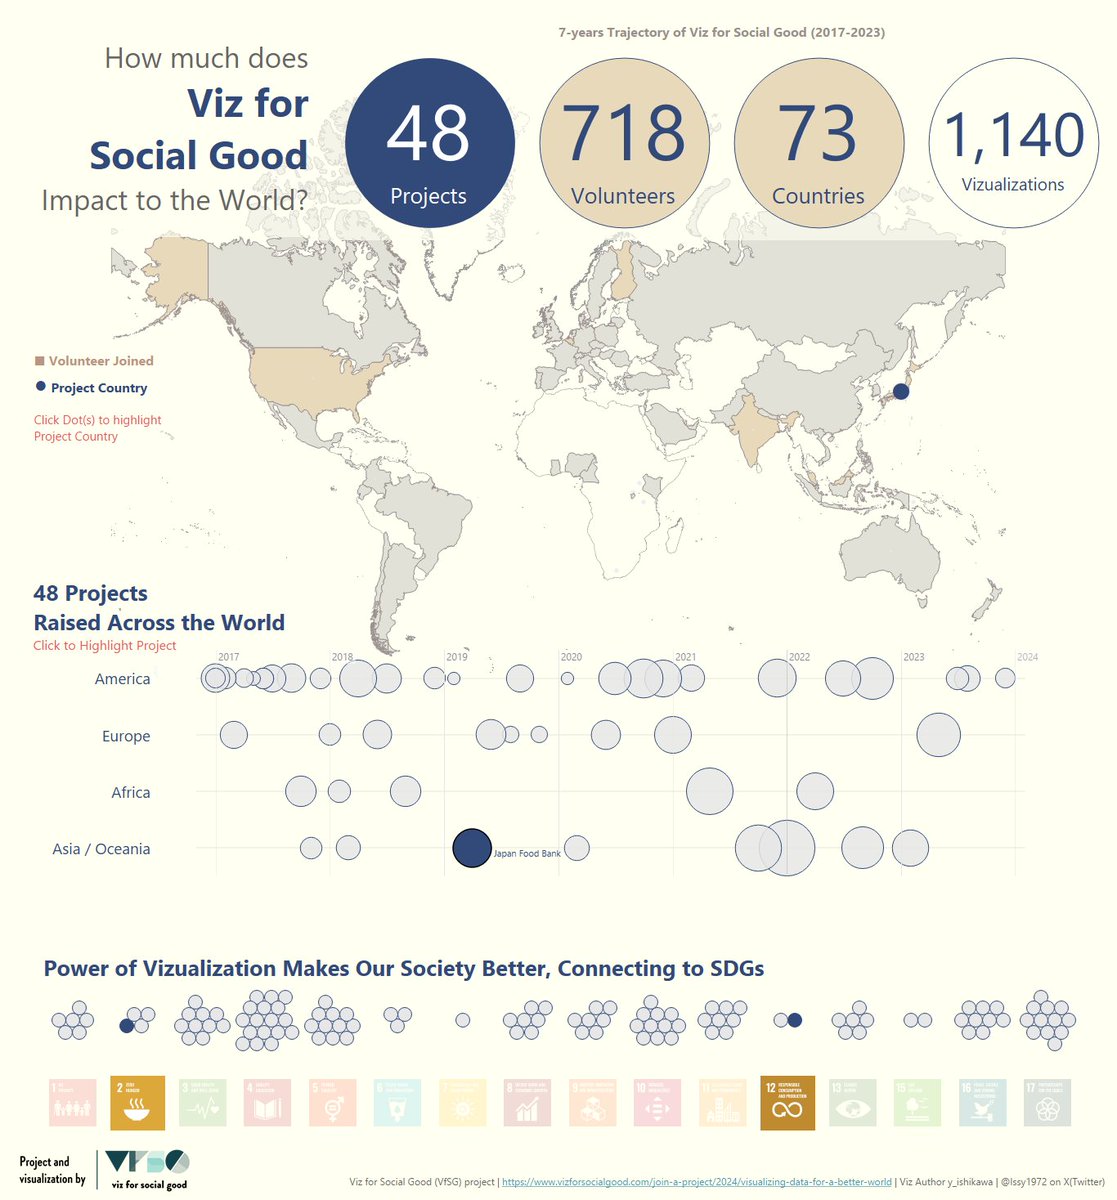 My first #Vizforsocialgood challenge in 2024
Visualizing Social Impact of @VizFSG 

Tried showing 7-year Trajectory of this activity, and how connects to SDGs, w/interaction in @tableaupublic 

viz URL
public.tableau.com/app/profile/ya…

feedback welcome